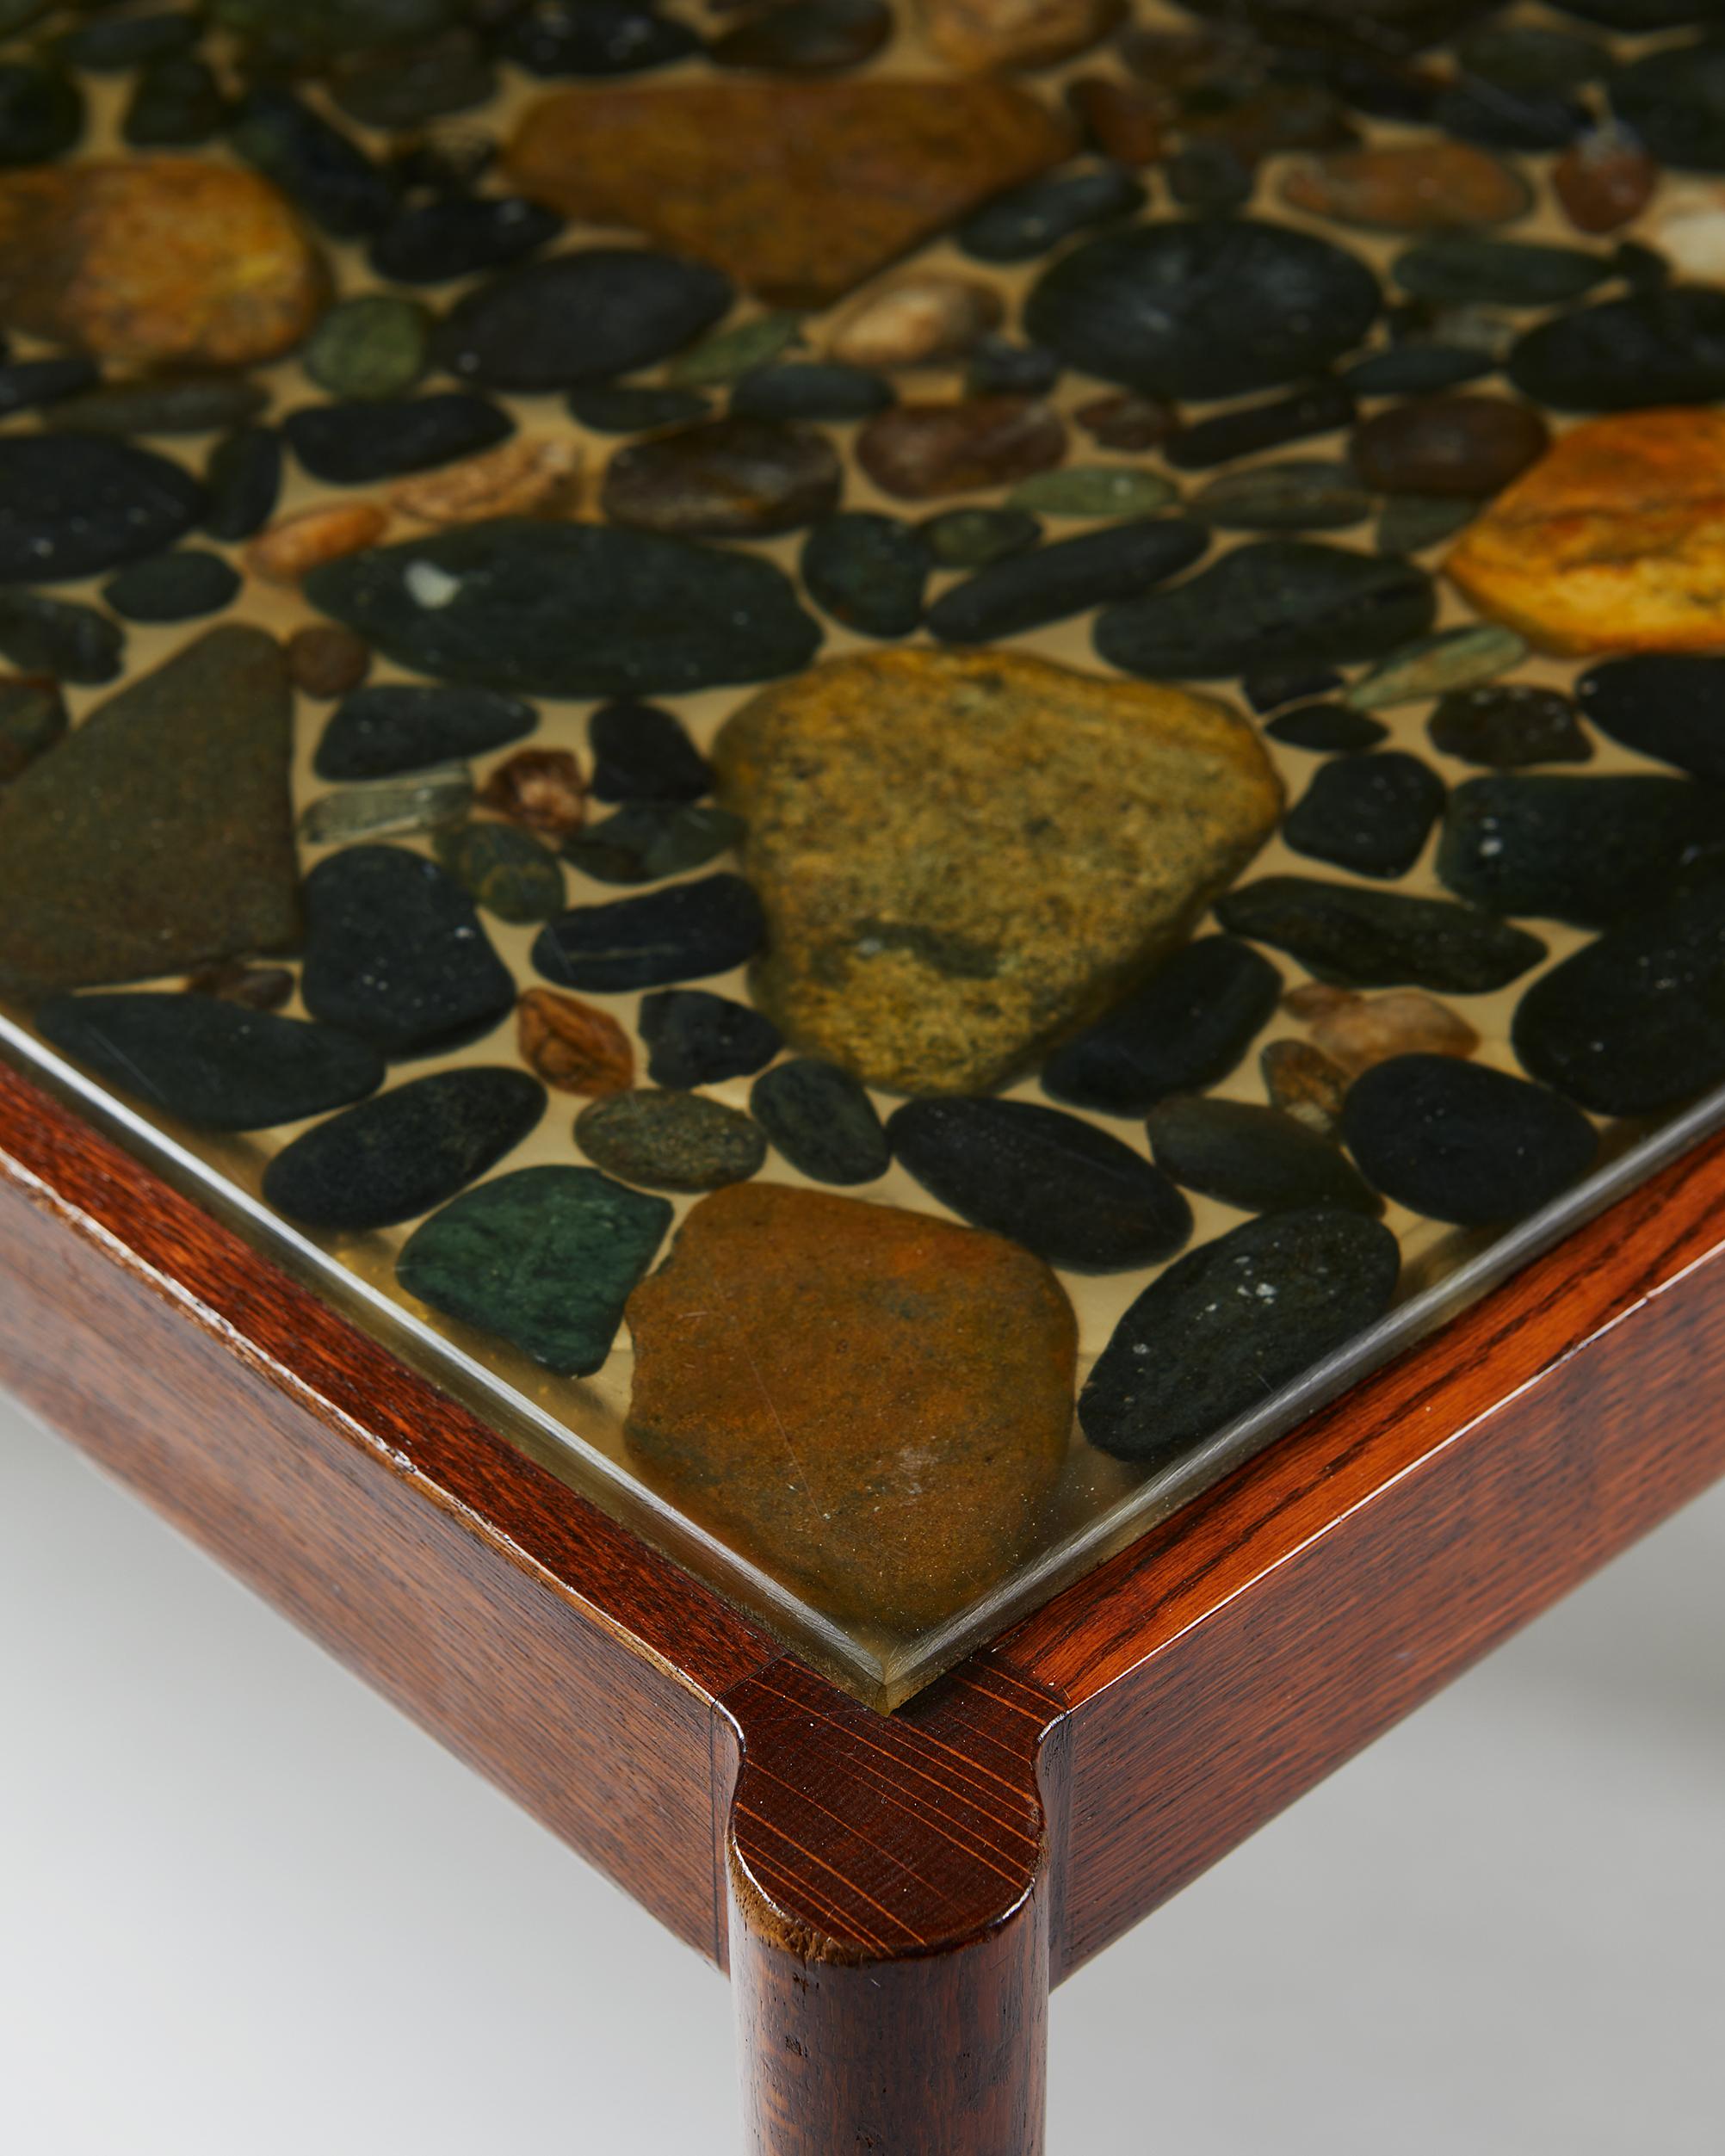 Rosewood and pebbles set in resin.

Measures: H 48 cm, 1' 7